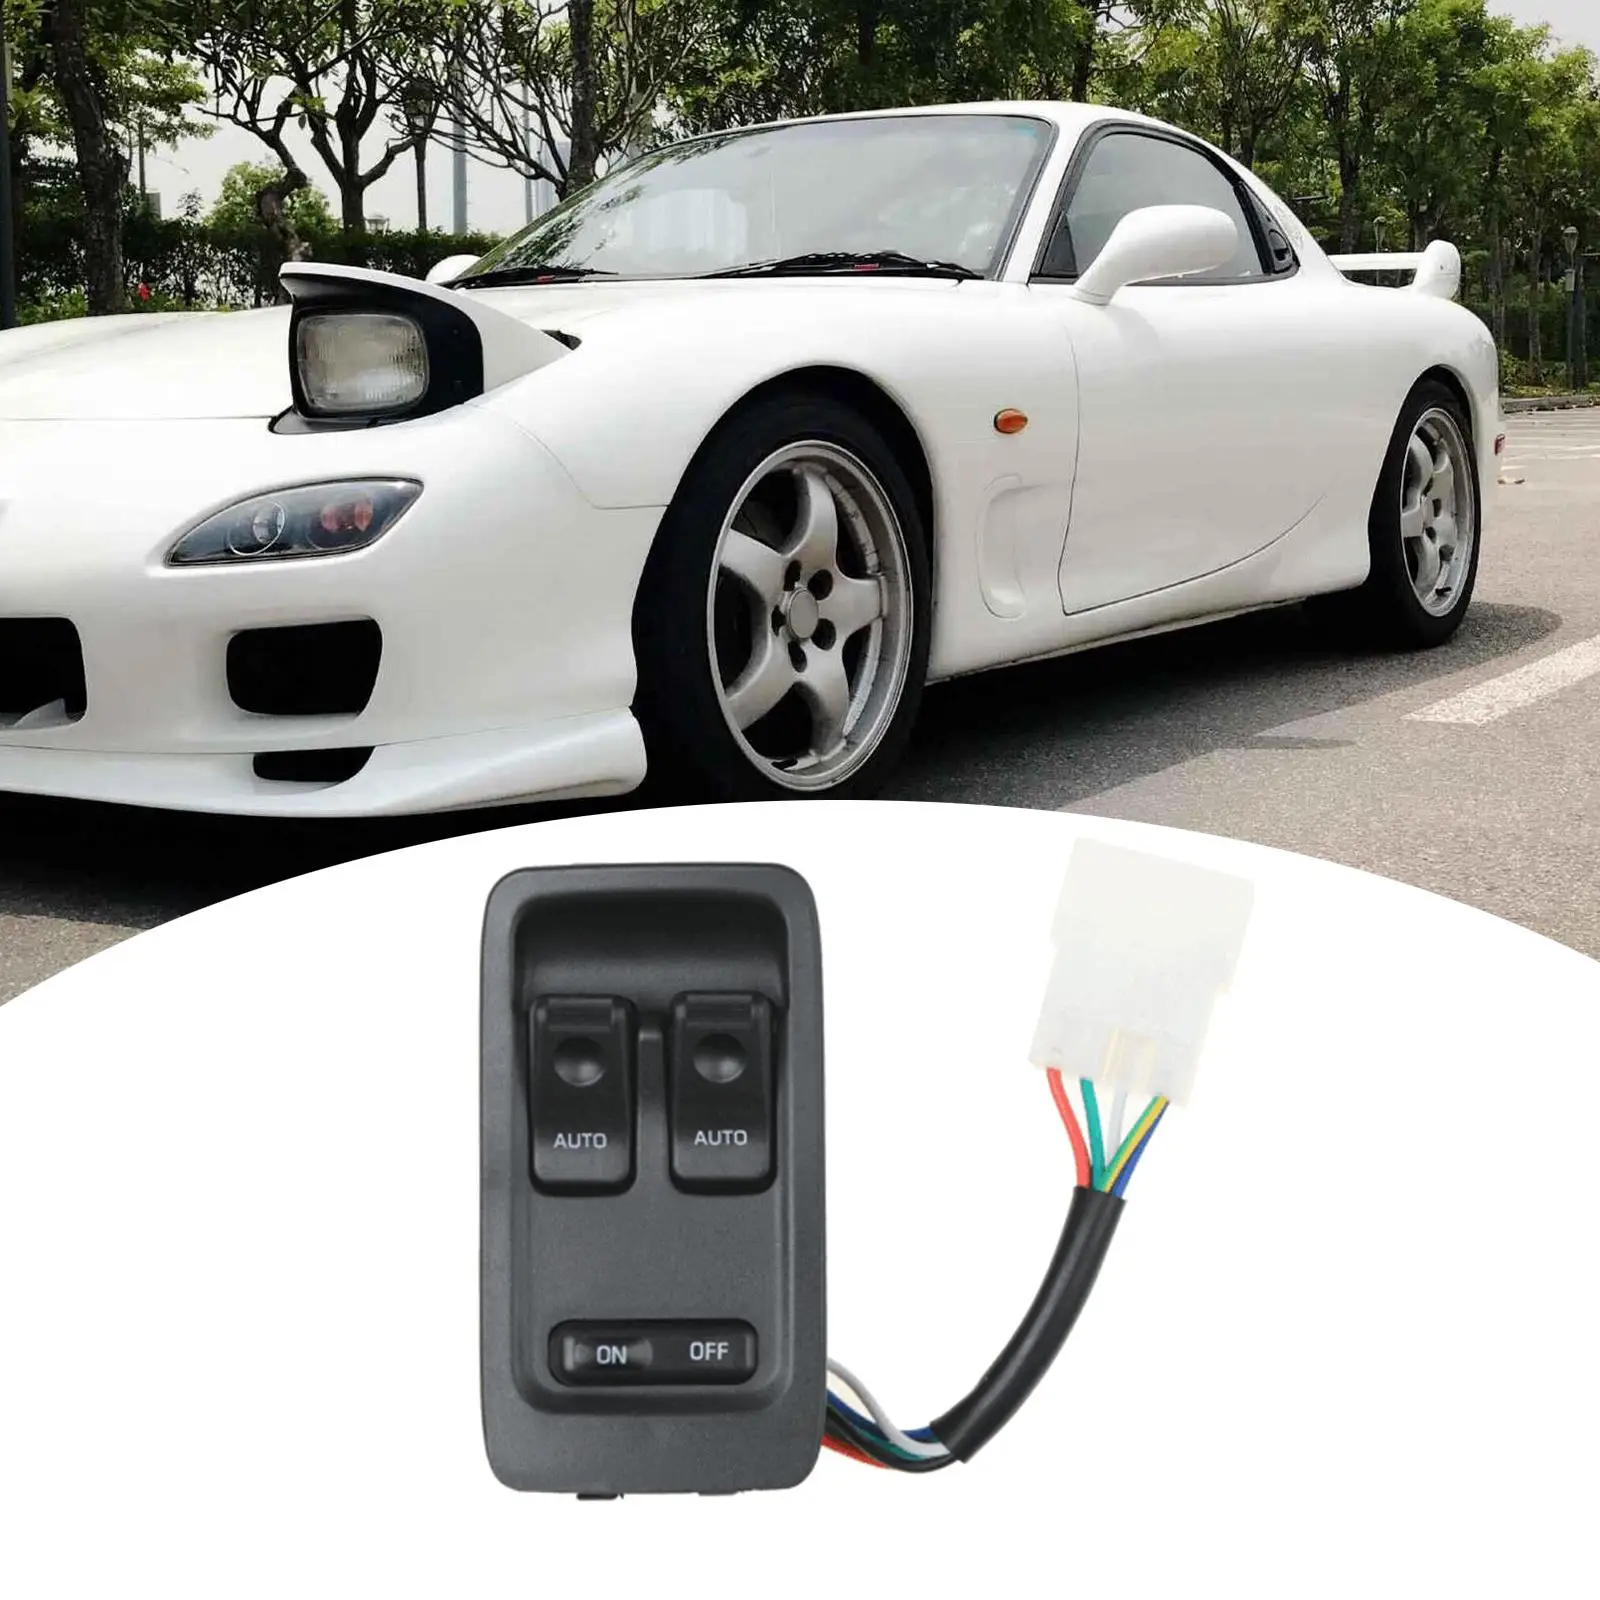 FD14-66-350C FD1466350C Spare Parts Premium High Performance Window Switch Control replace for Mazda RX7 RX-7 1993-2002